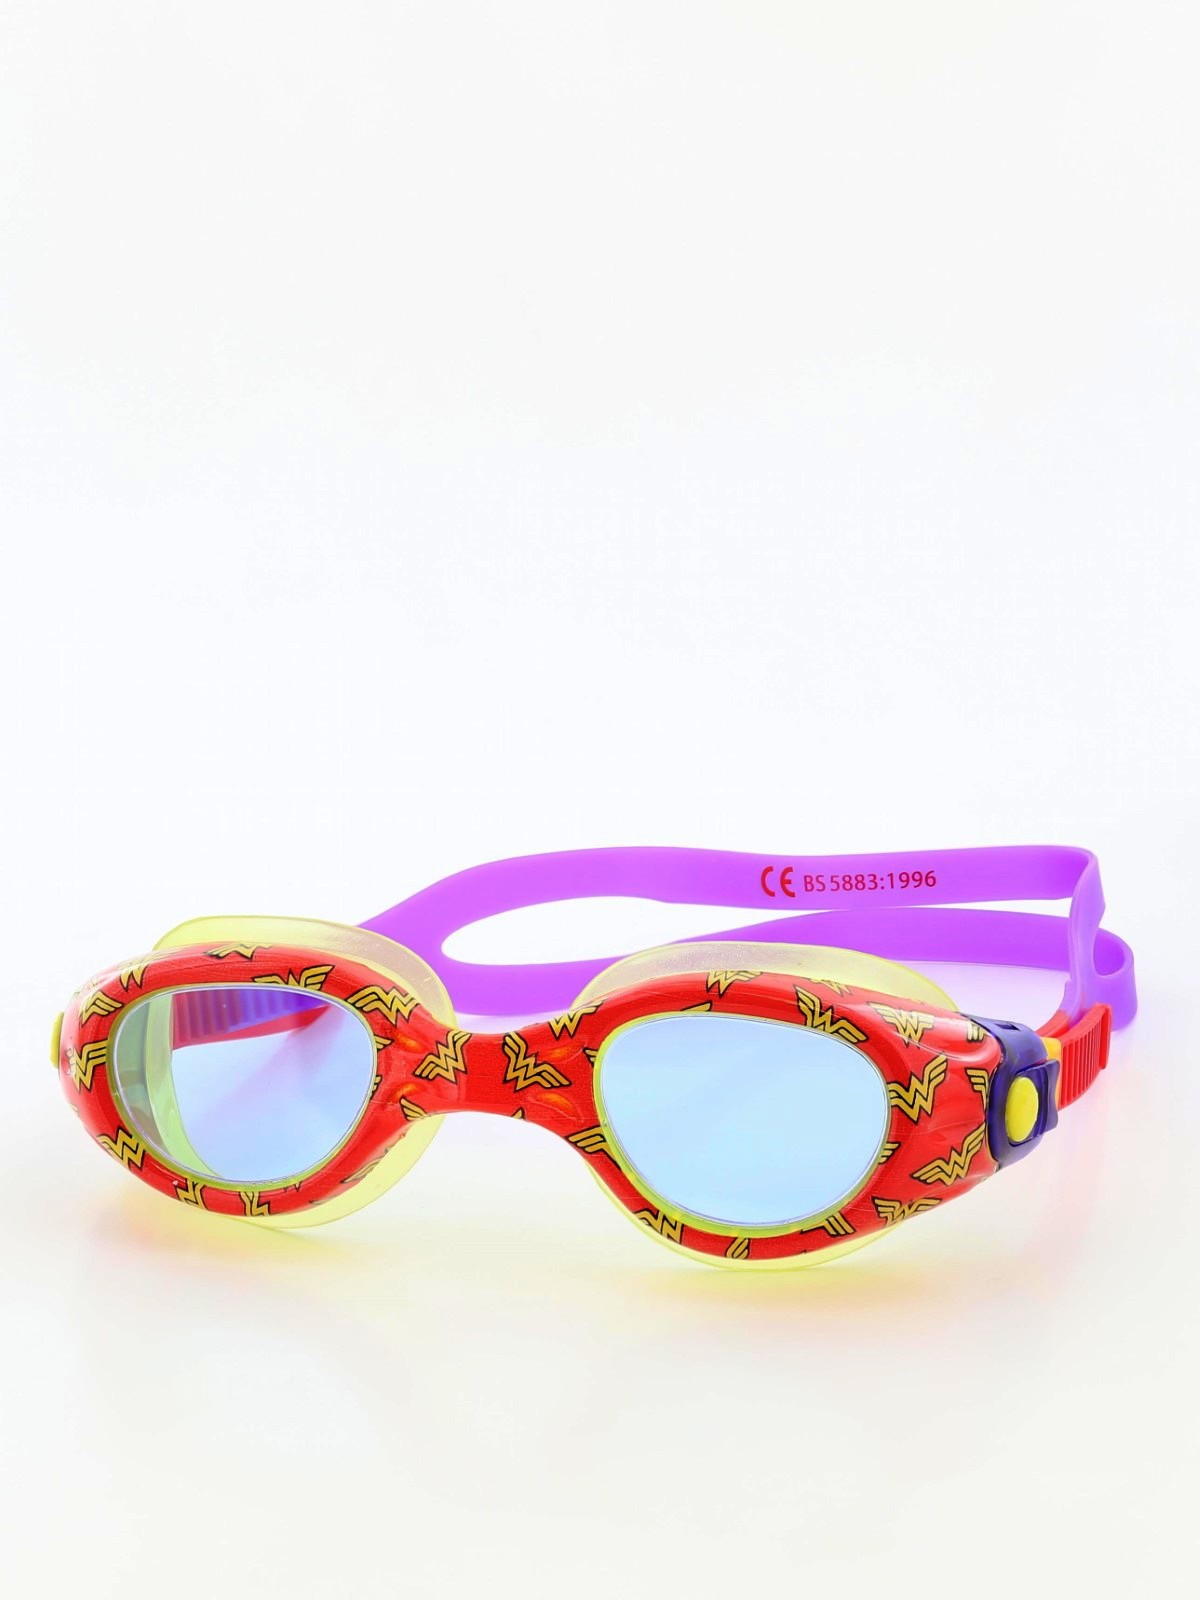 Zoggs Junior One Piece Wonder Woman Goggle Red/Blue